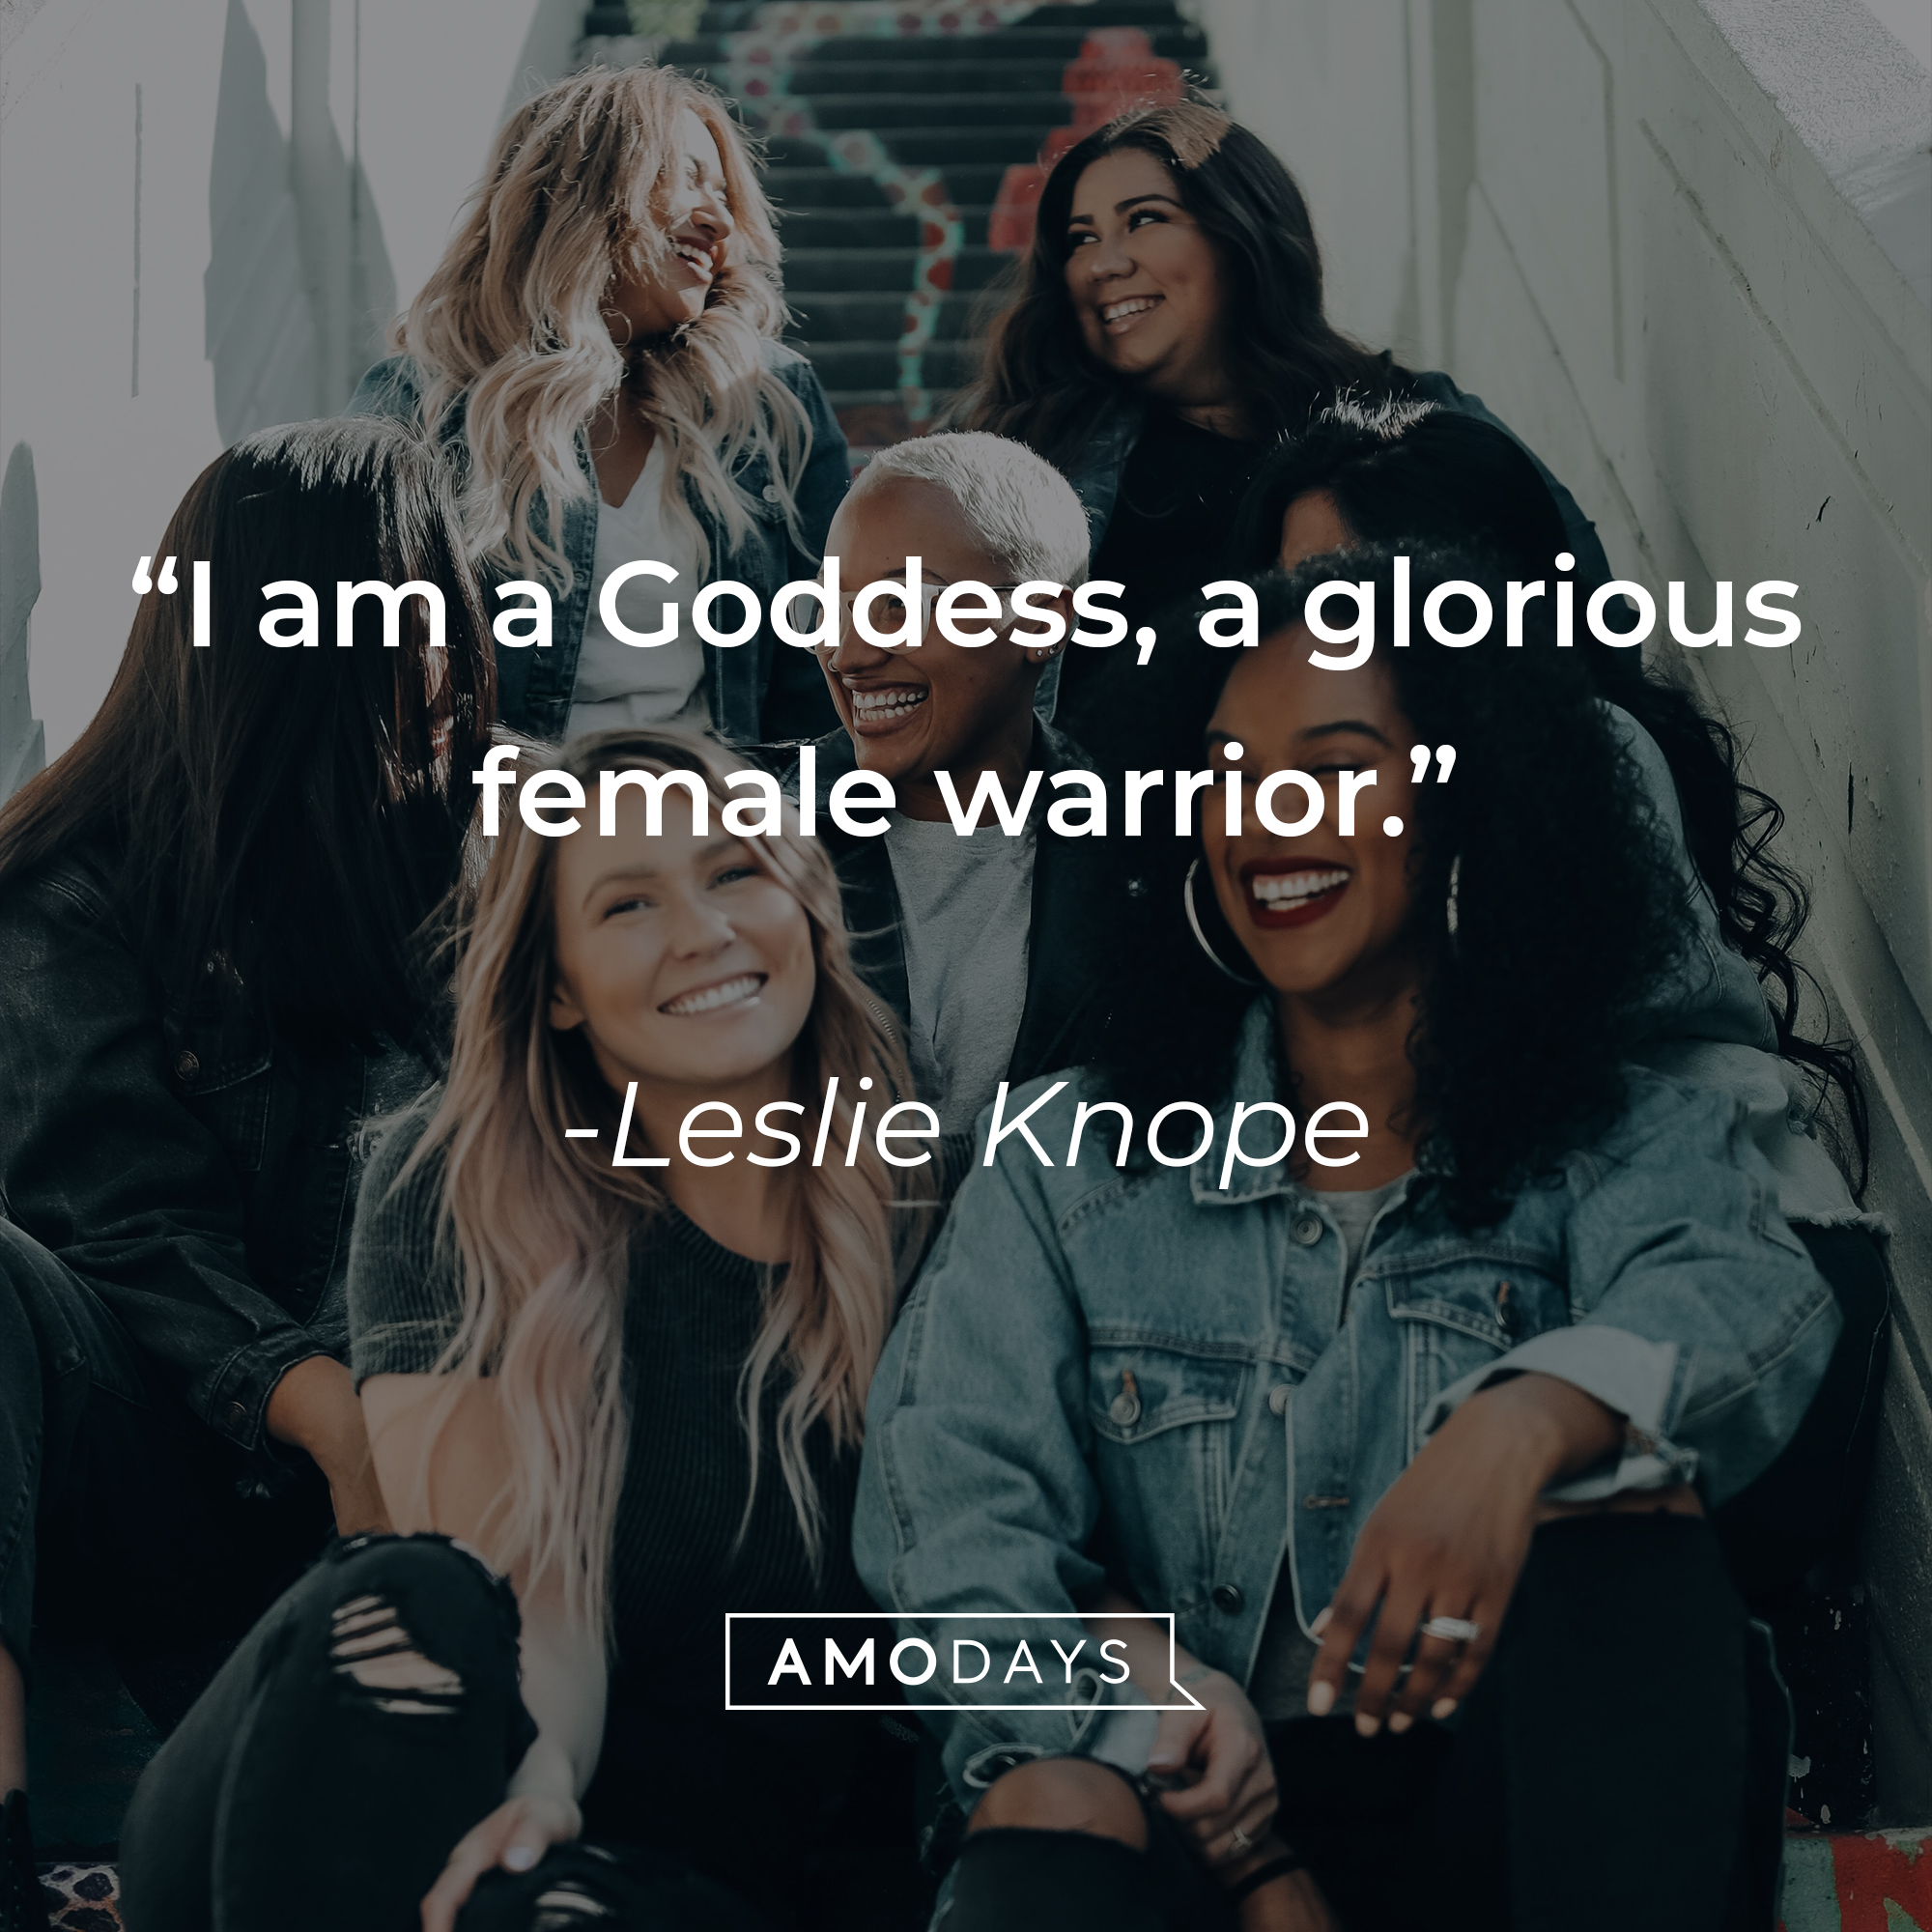 Leslie Knope's quote: "I am a Goddess, a glorious female warrior." | Source: Unsplash